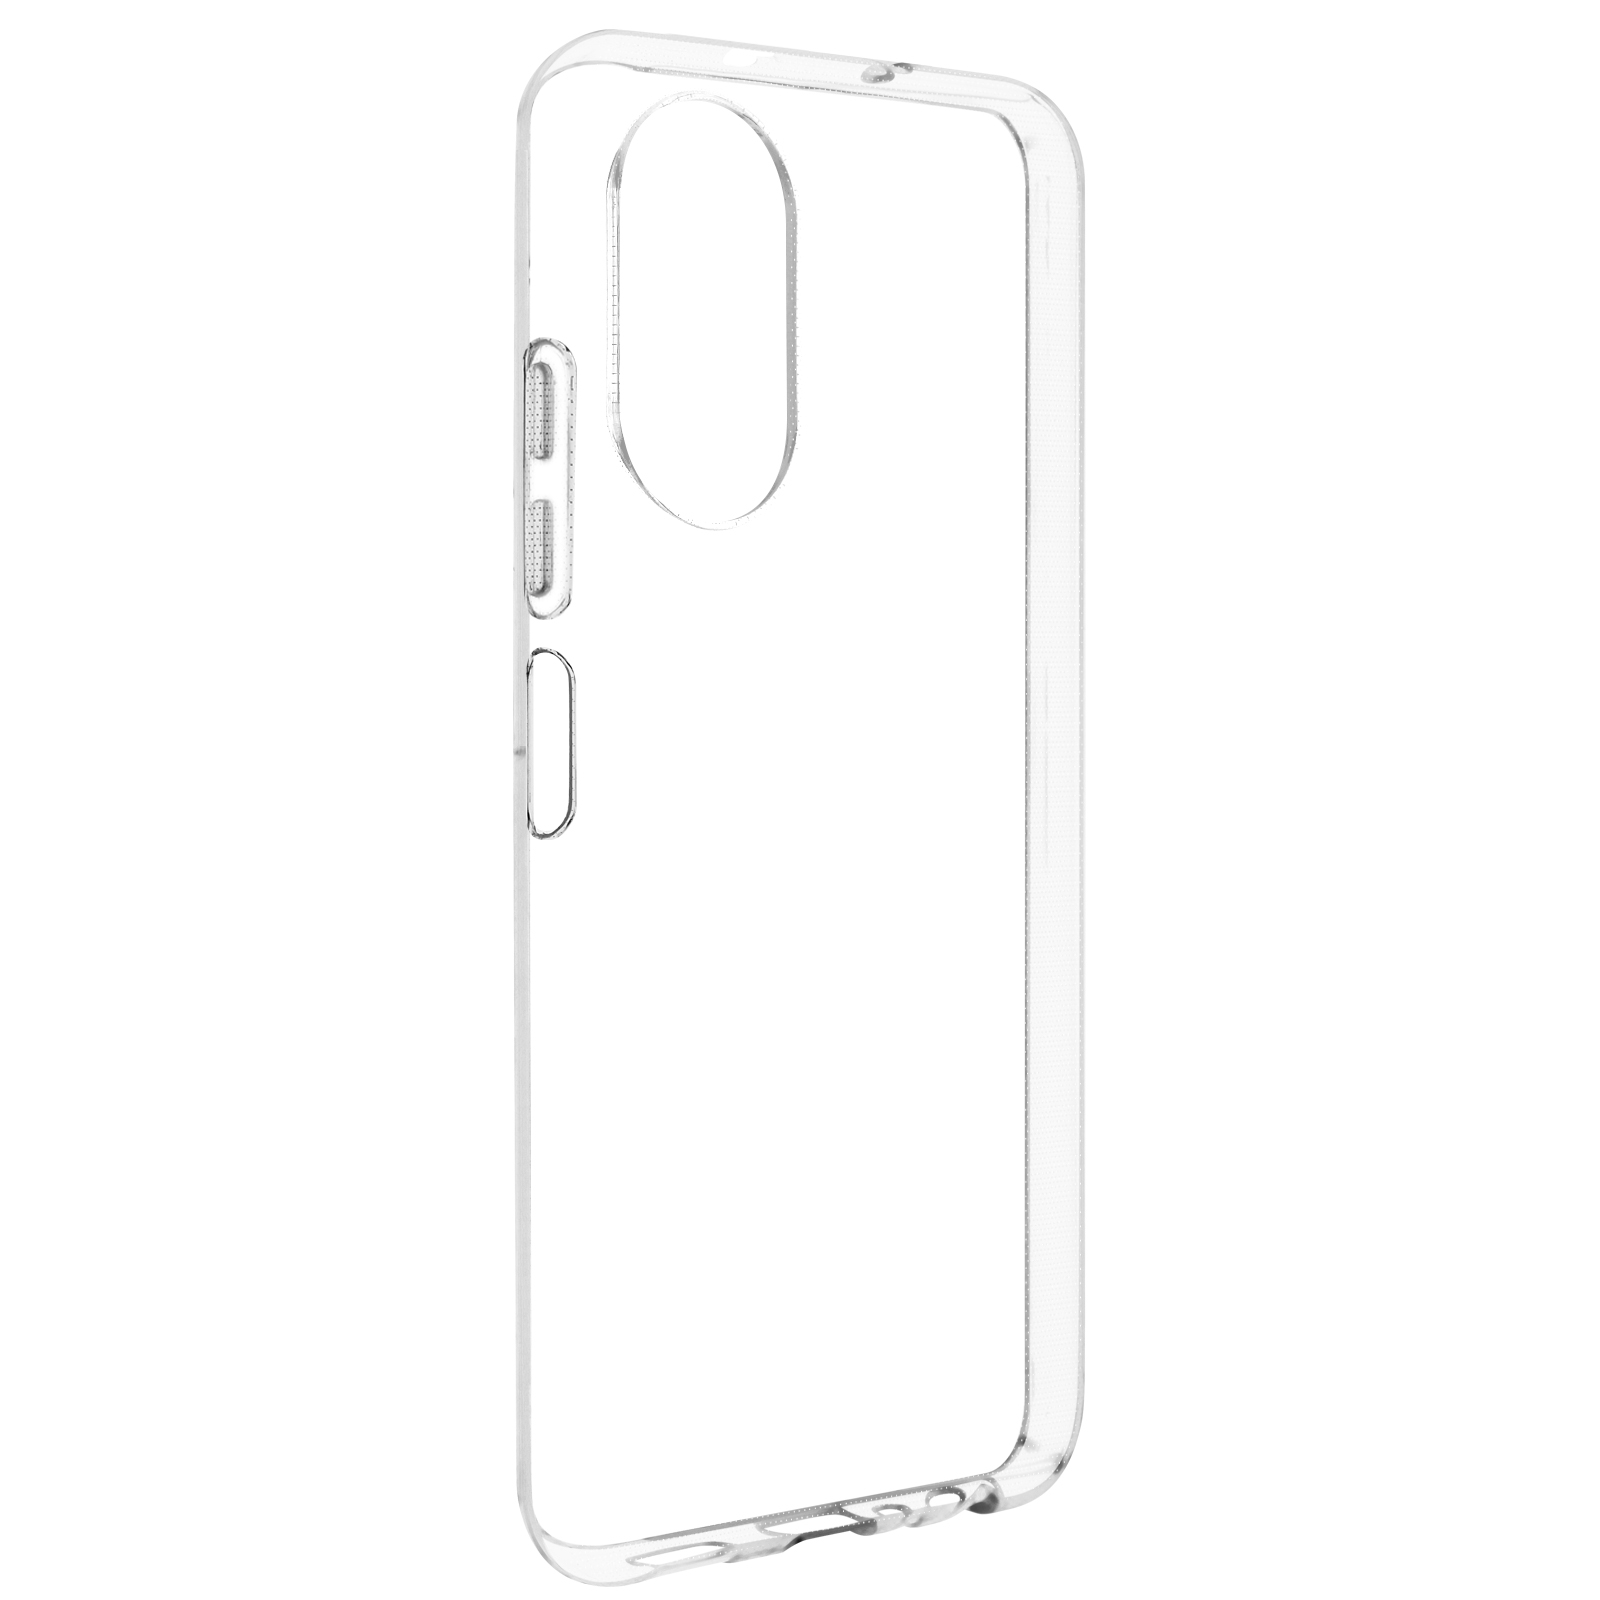 Backcover, Honor MYWAY Honor, Schutzhülle Series, Transparent X7, weiche